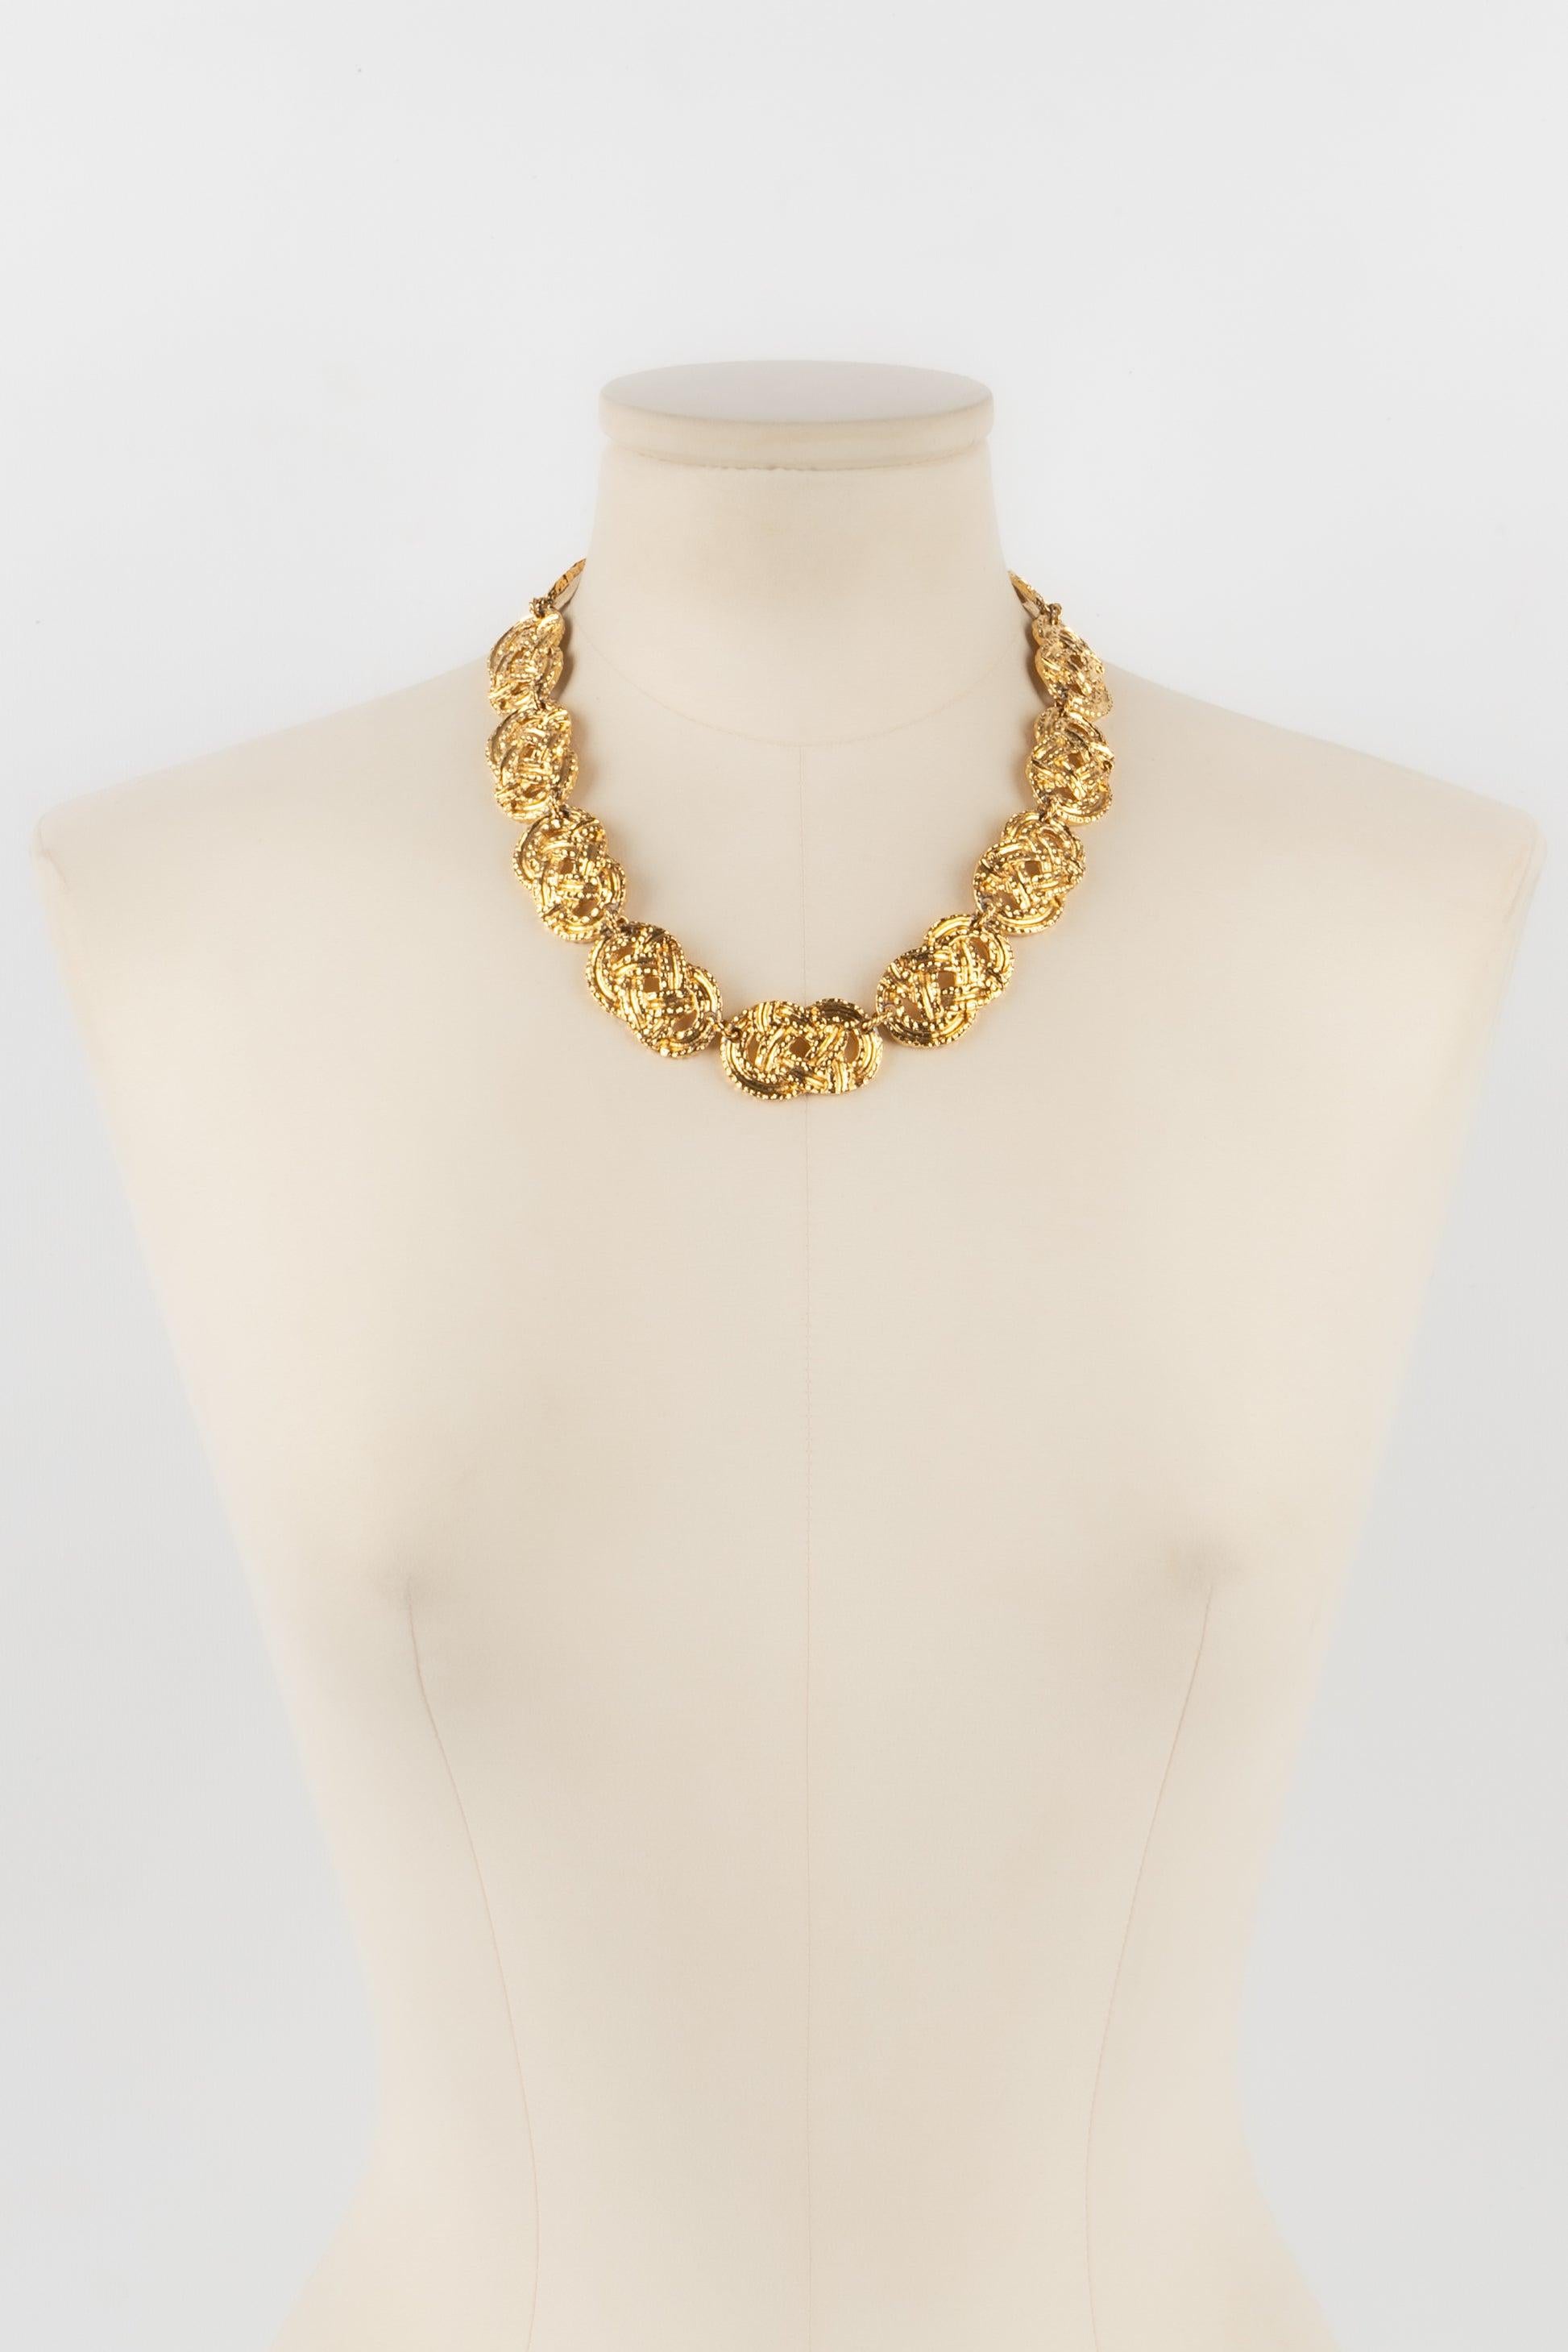 Guy Laroche - Engraved gold metal necklace.

Additional information:
Condition: Very good condition
Dimensions: Length: 46.5 cm

Seller Reference: BC56
